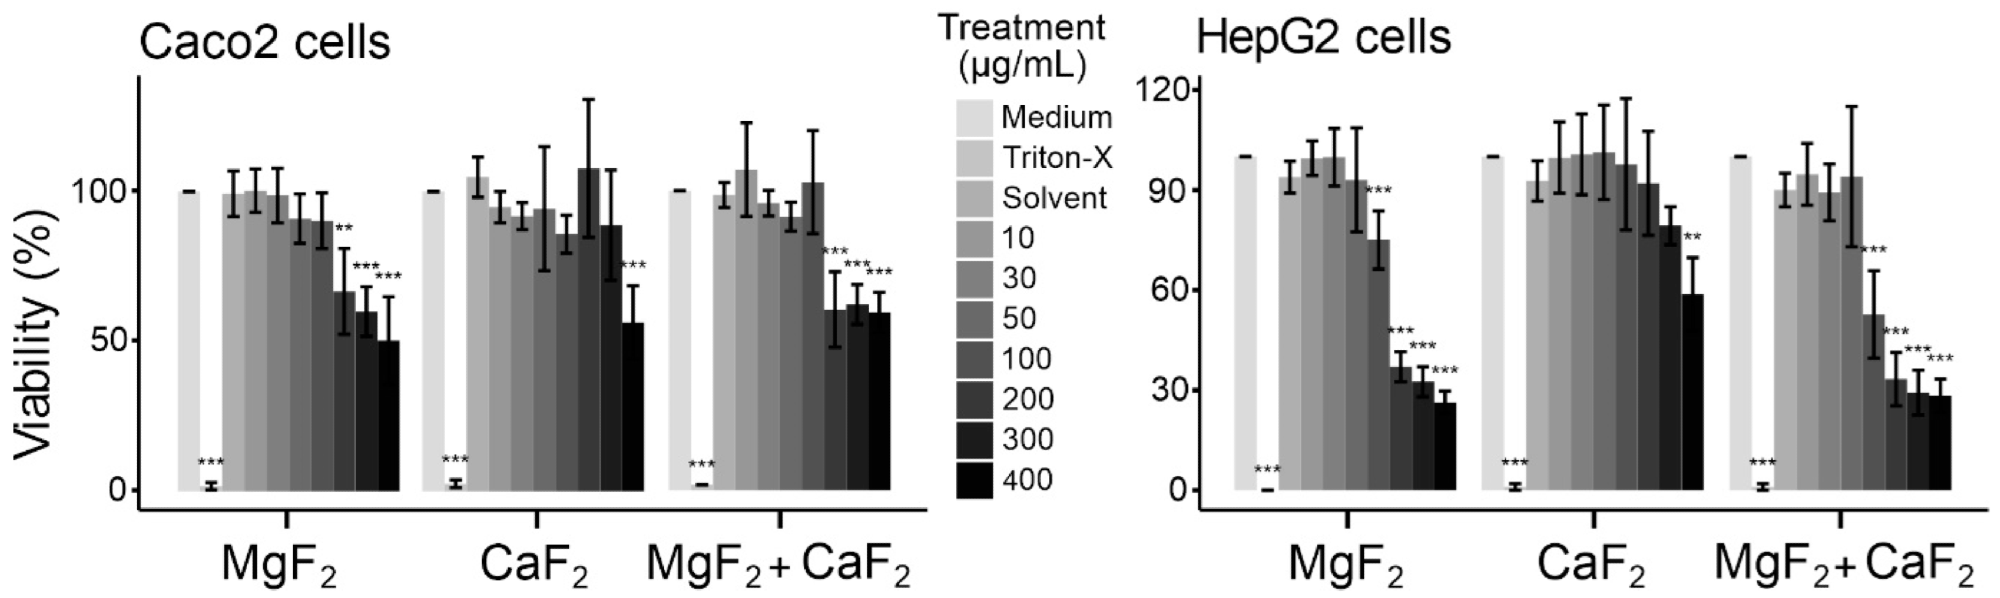 Cell viability of Caco-2 cells (left) and HepG2 cells (right) in MTT assays.